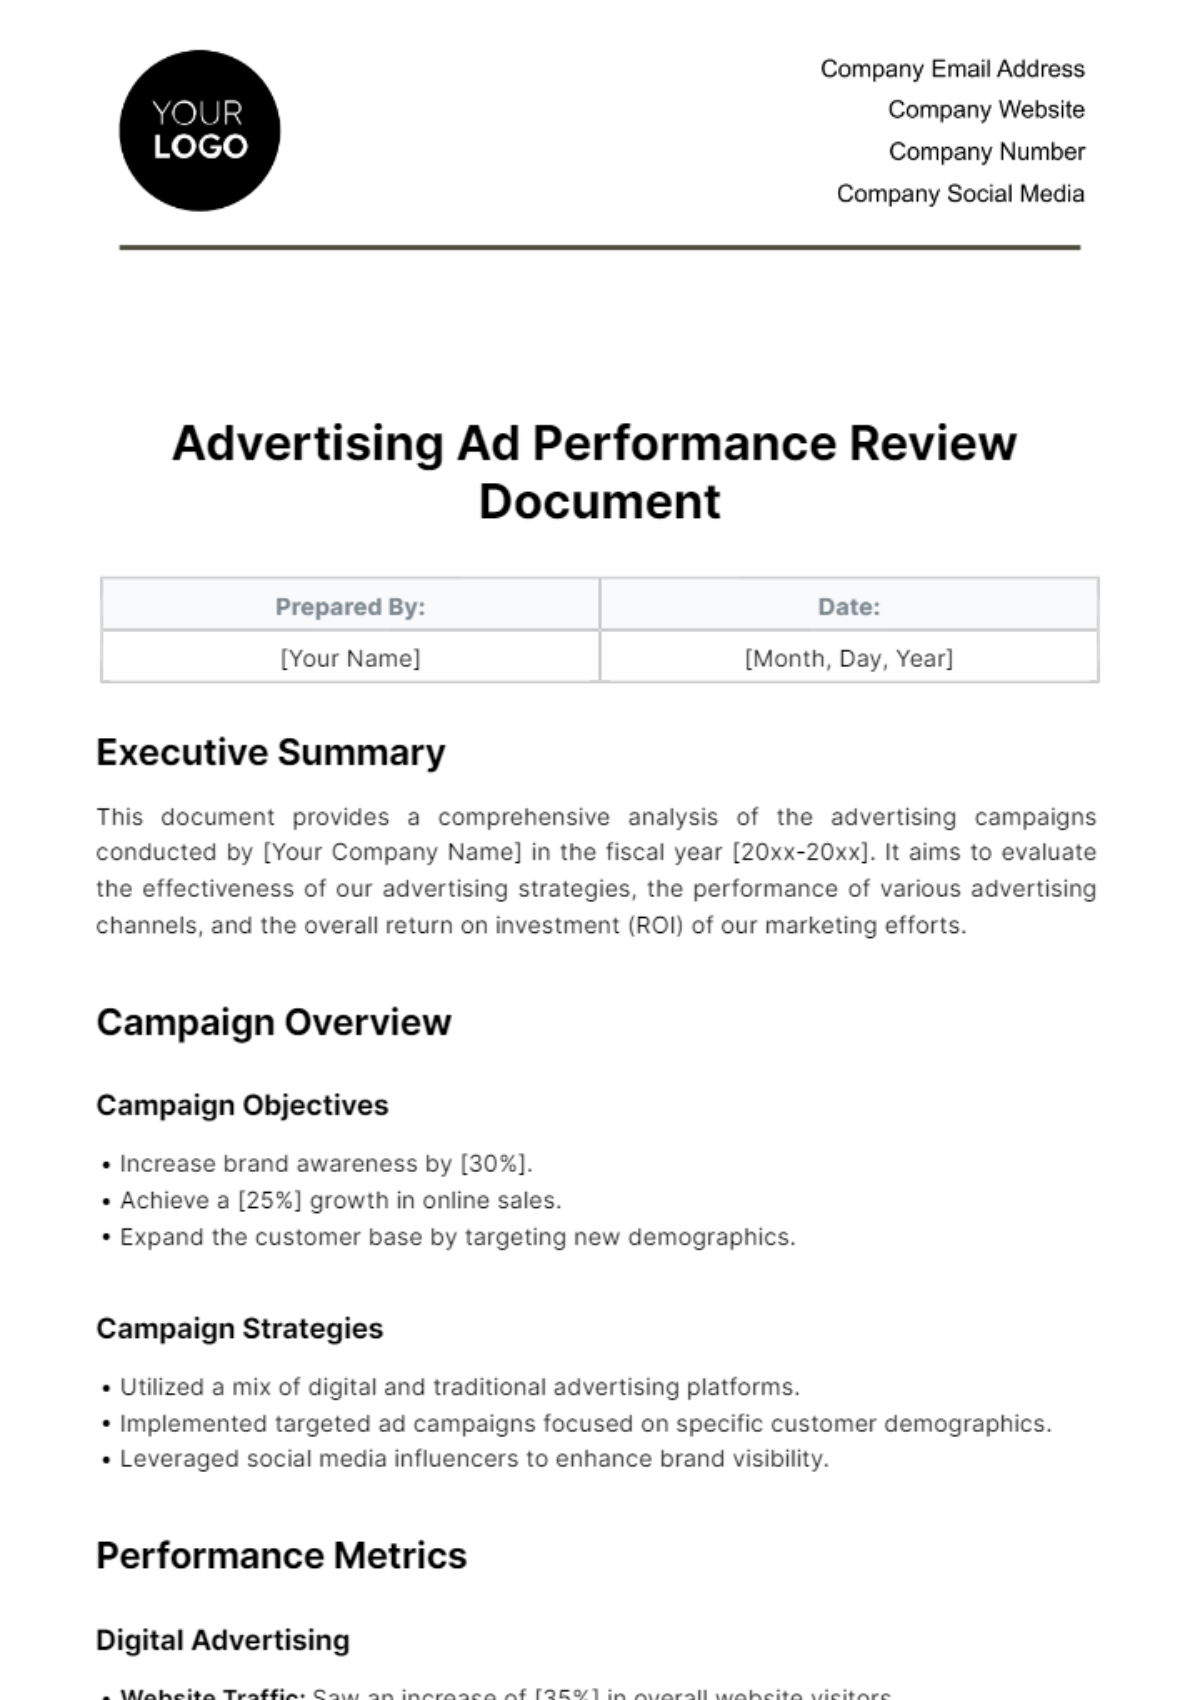 Advertising Ad Performance Review Document Template